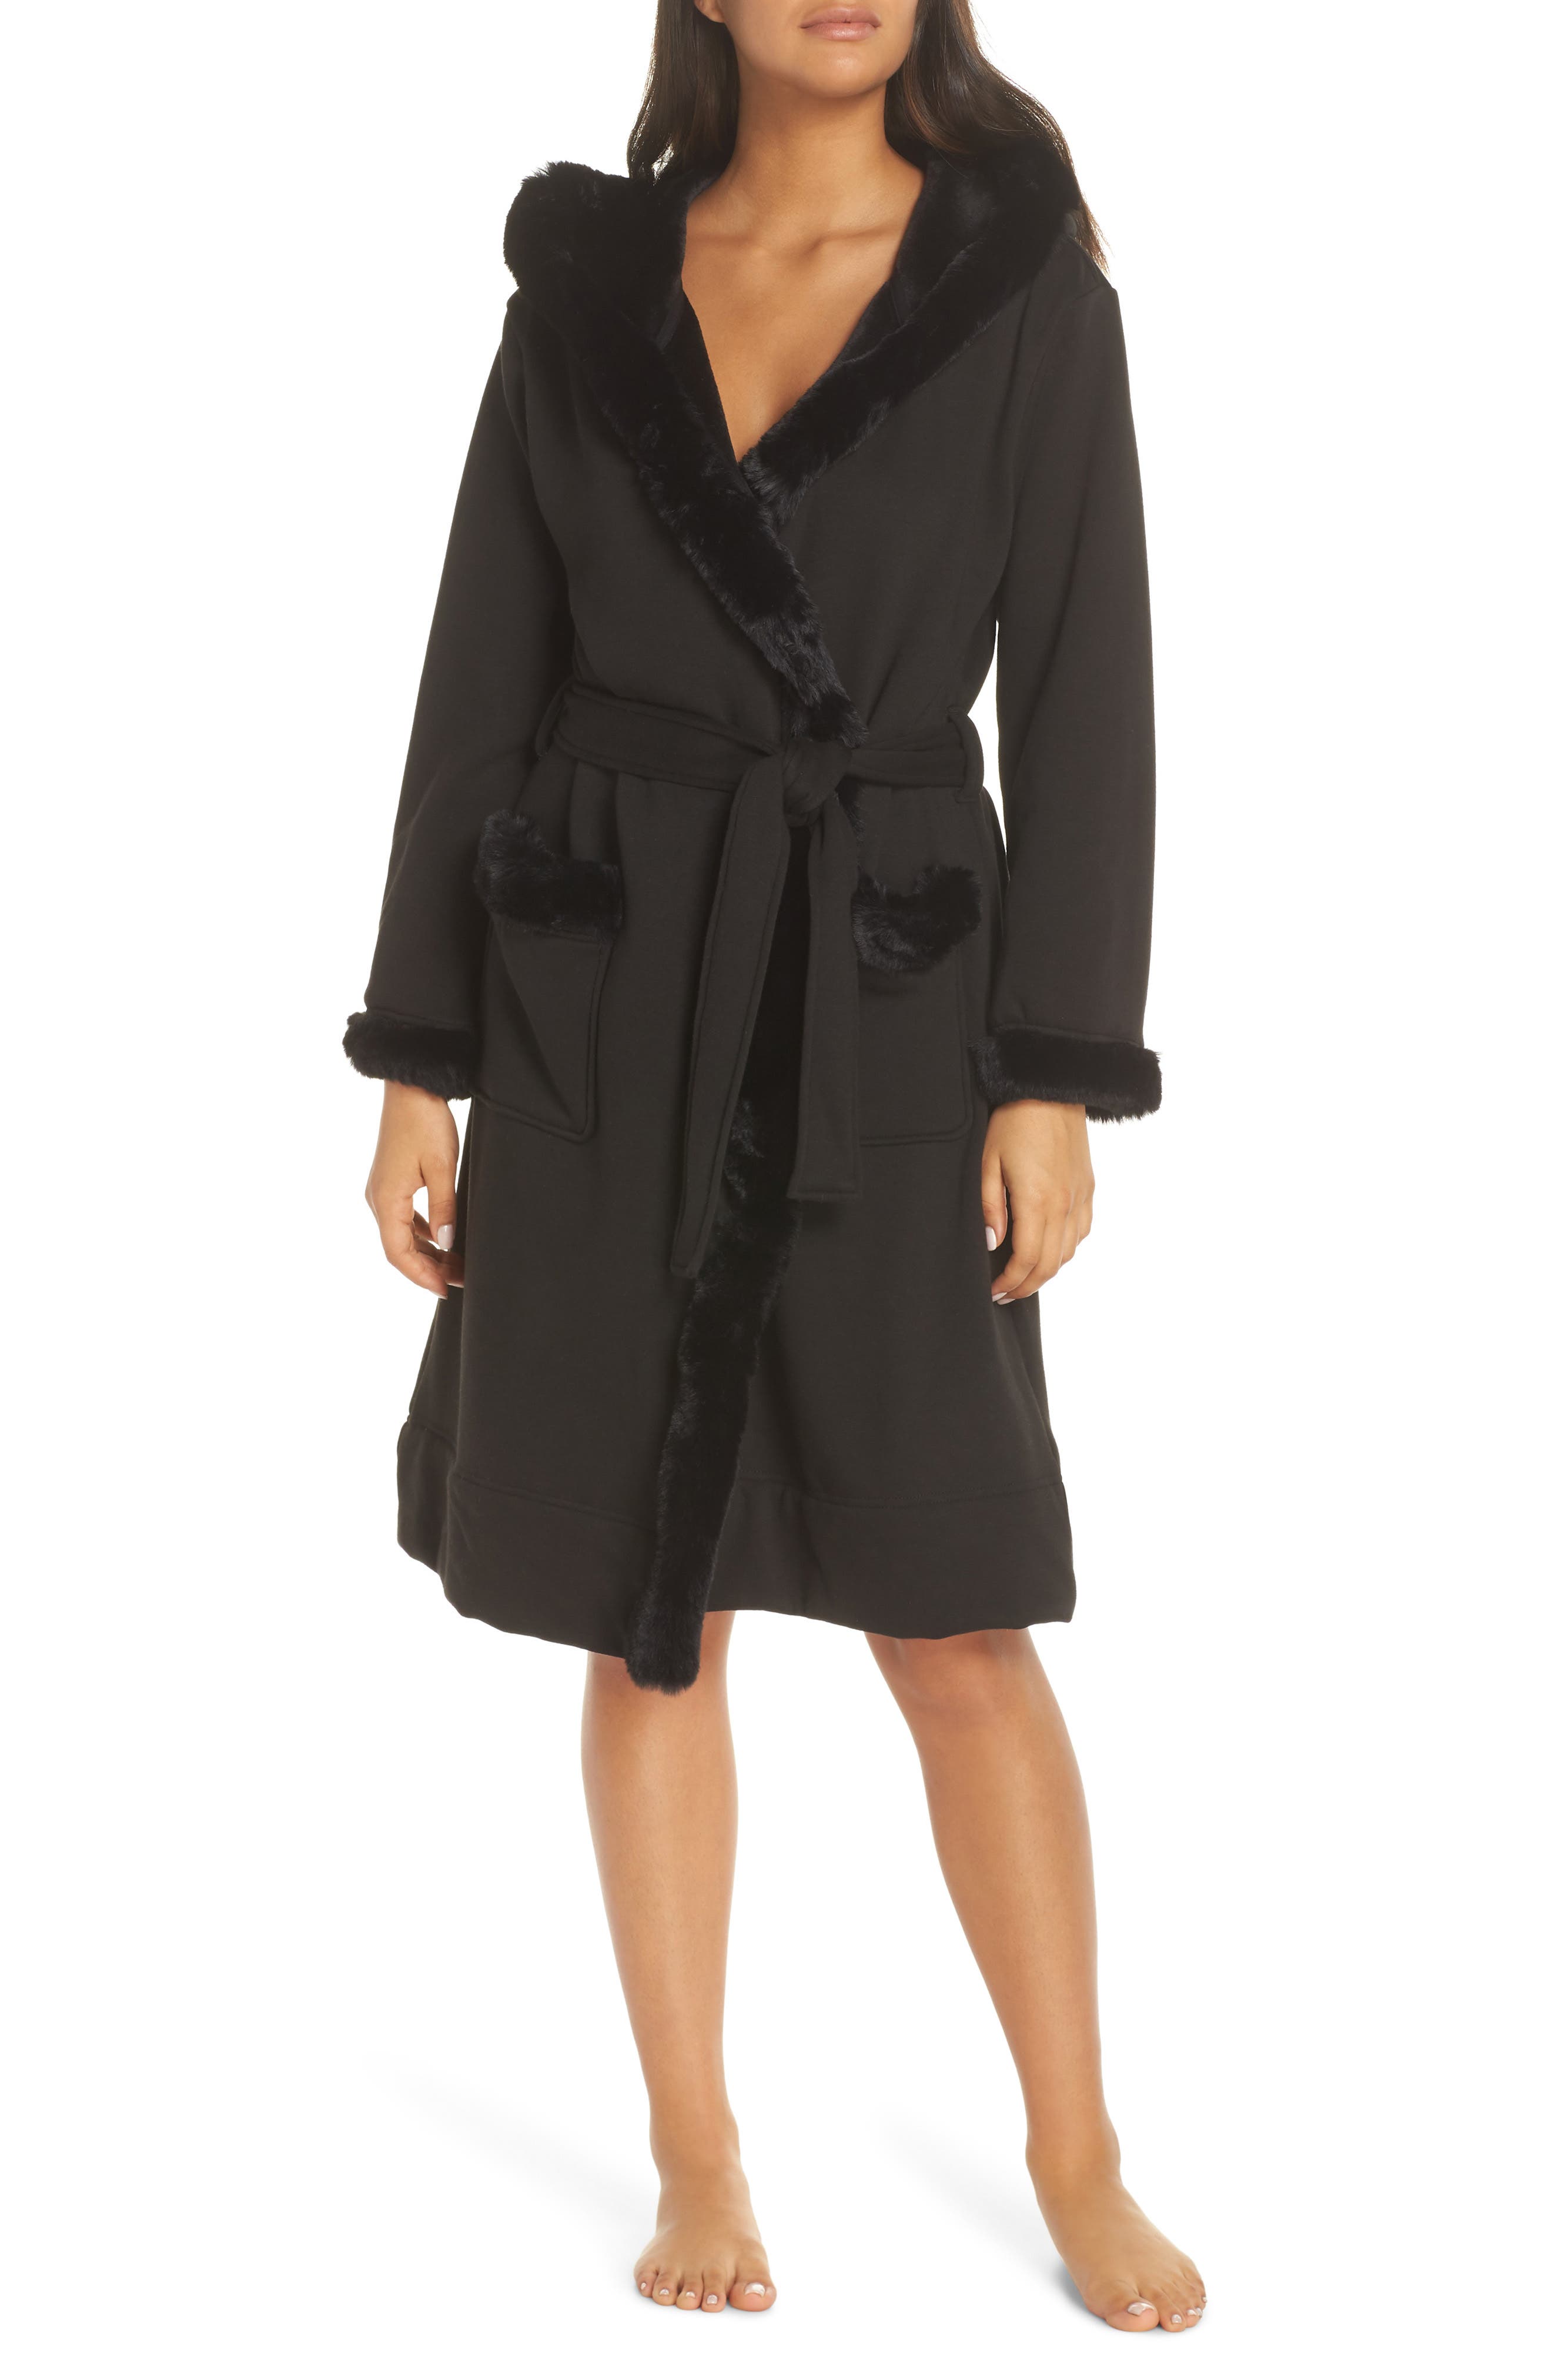 ugg duffield deluxe robe